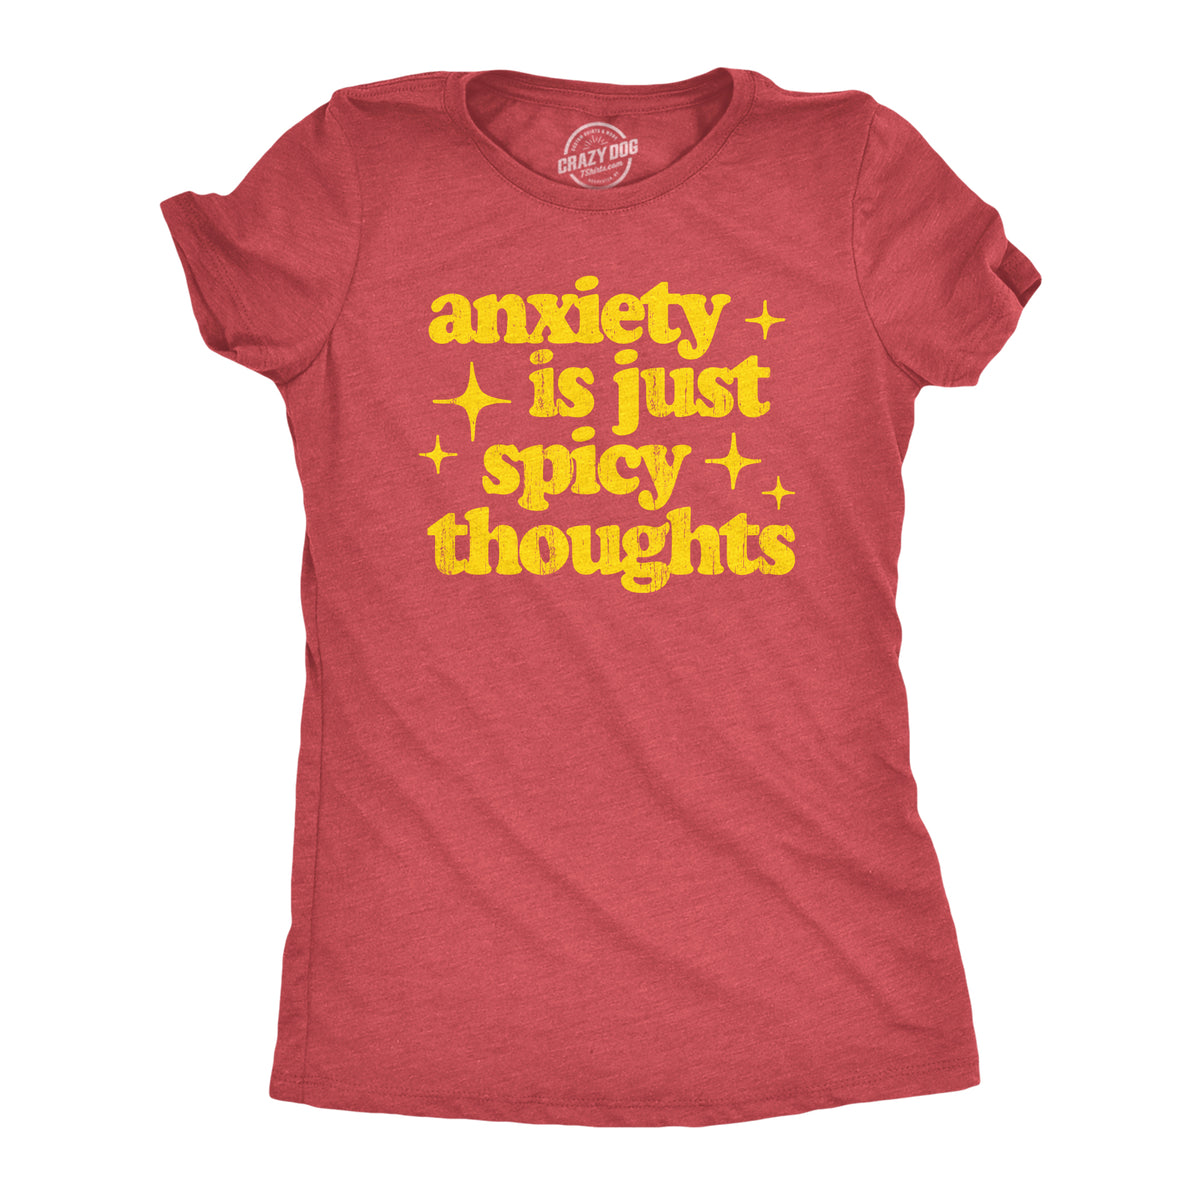 Funny Heather Red Anxiety Is Just Spicy Thoughts Womens T Shirt Nerdy Food Tee